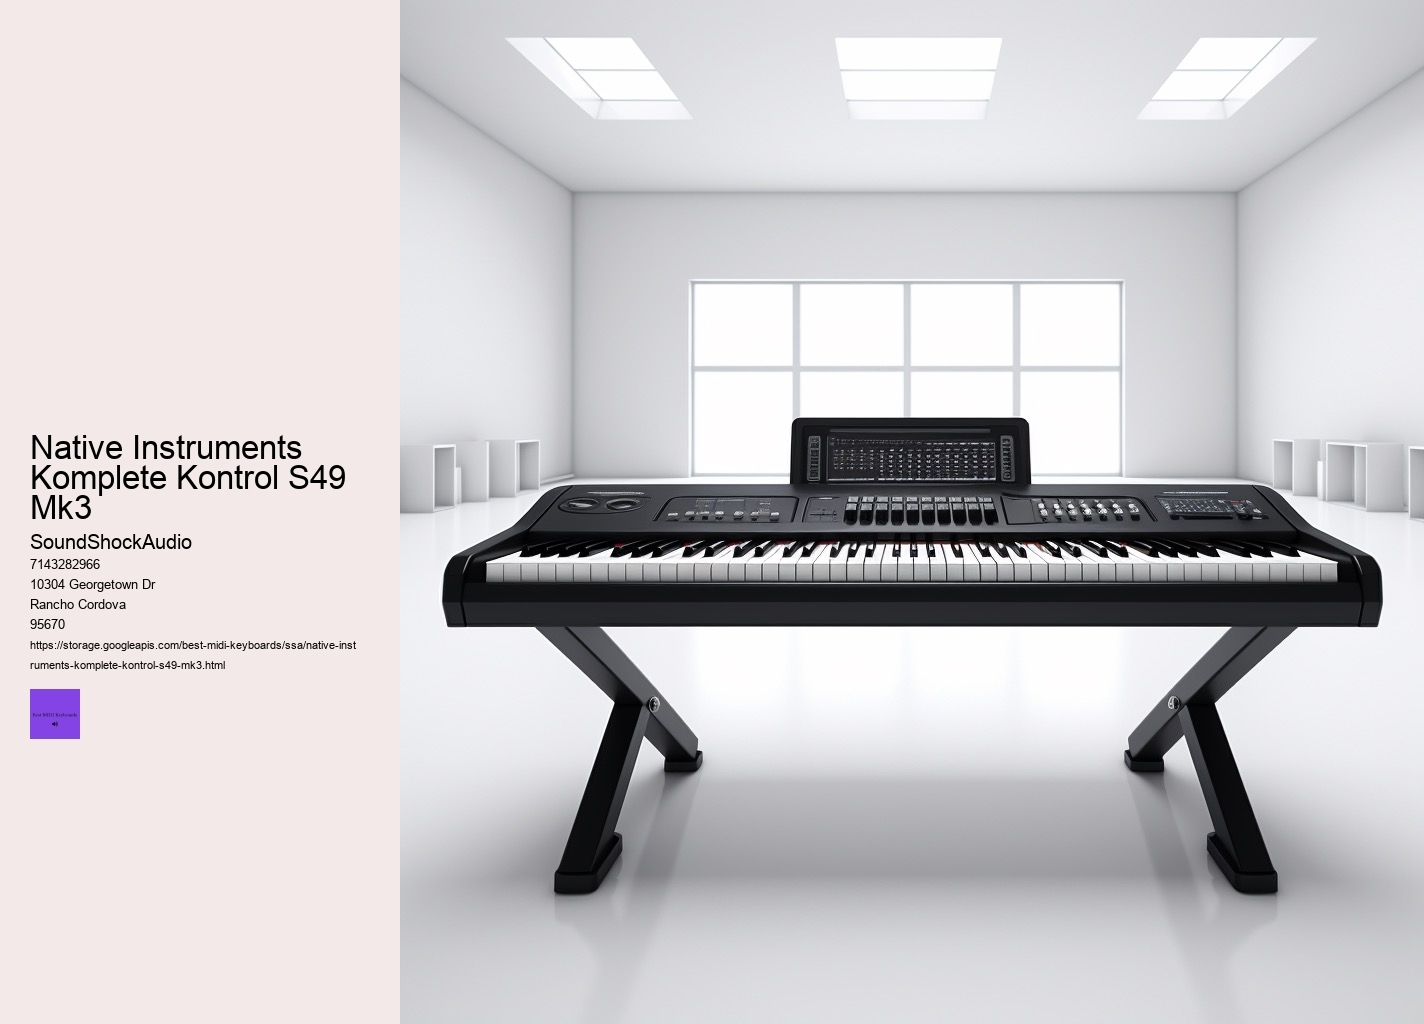 What are the perks of a MIDI keyboard?